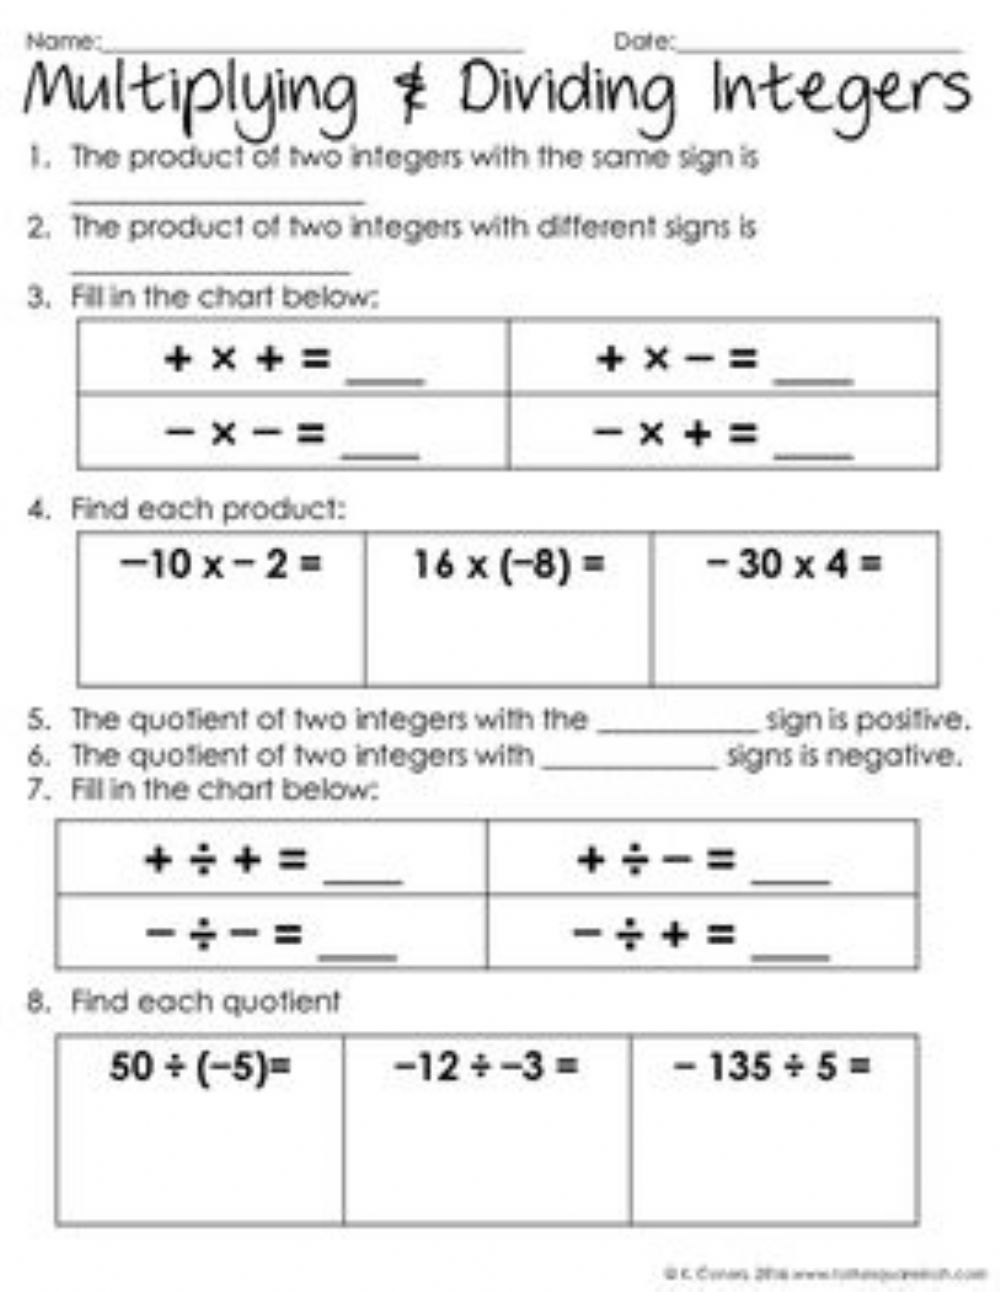 multiplication-and-division-worksheets-6th-printable-worksheets